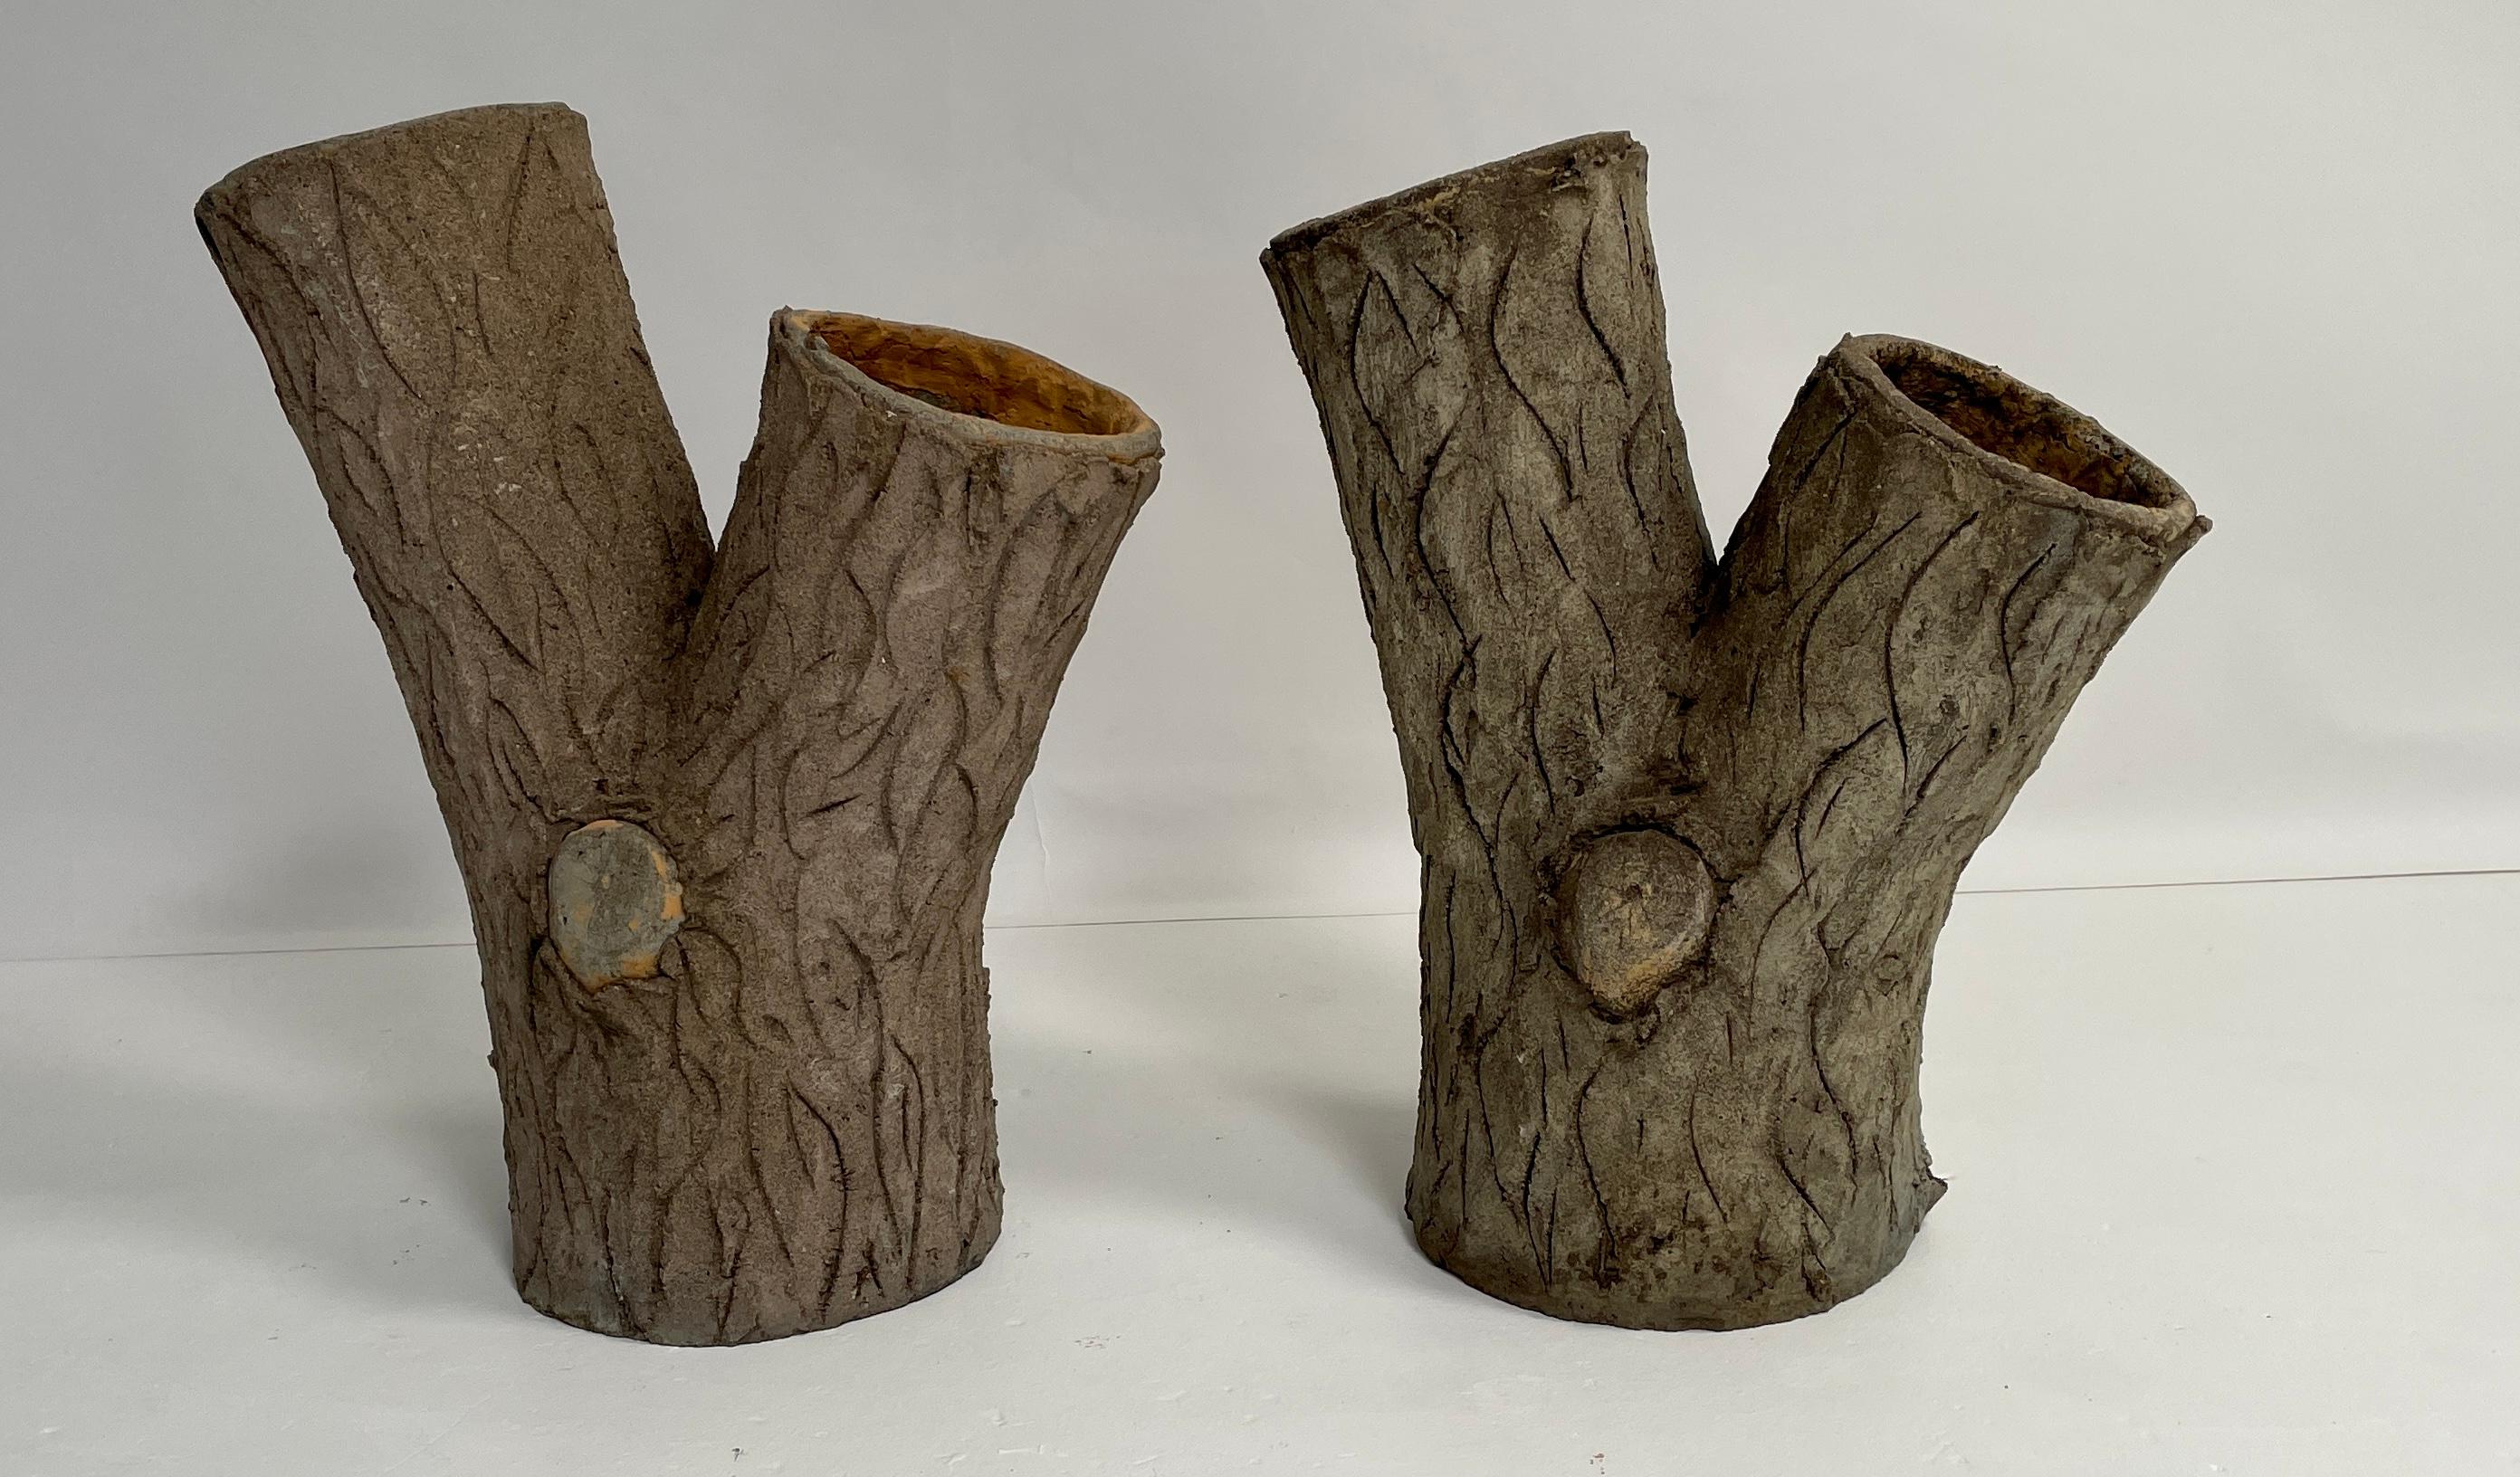 Two French Faux Bois jardinieres. these authentic planters are a pair. They have great details in the bark details with realistic knots. They solid with no cracks and have a drain hole. The mouths of each of the two openings is about 5